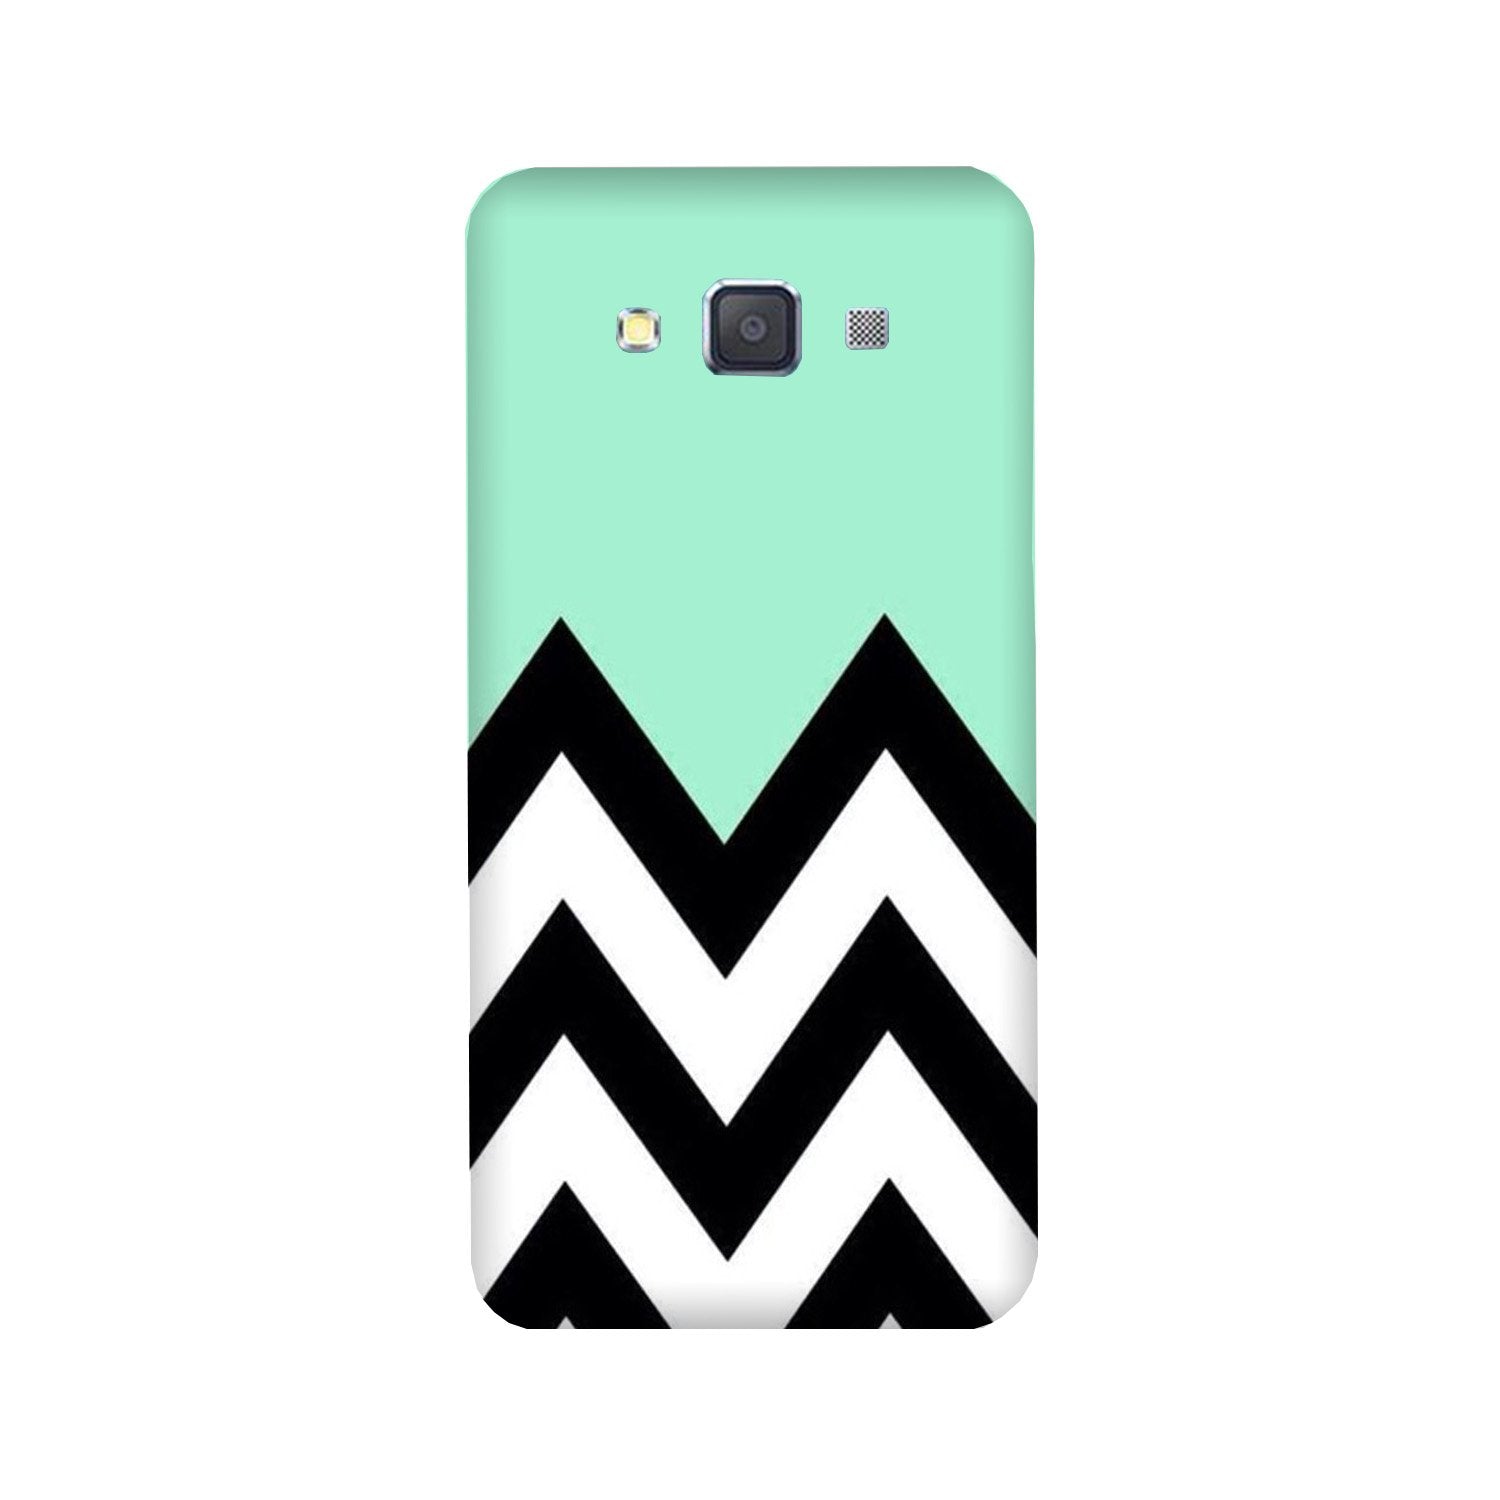 Pattern Case for Galaxy Grand Prime